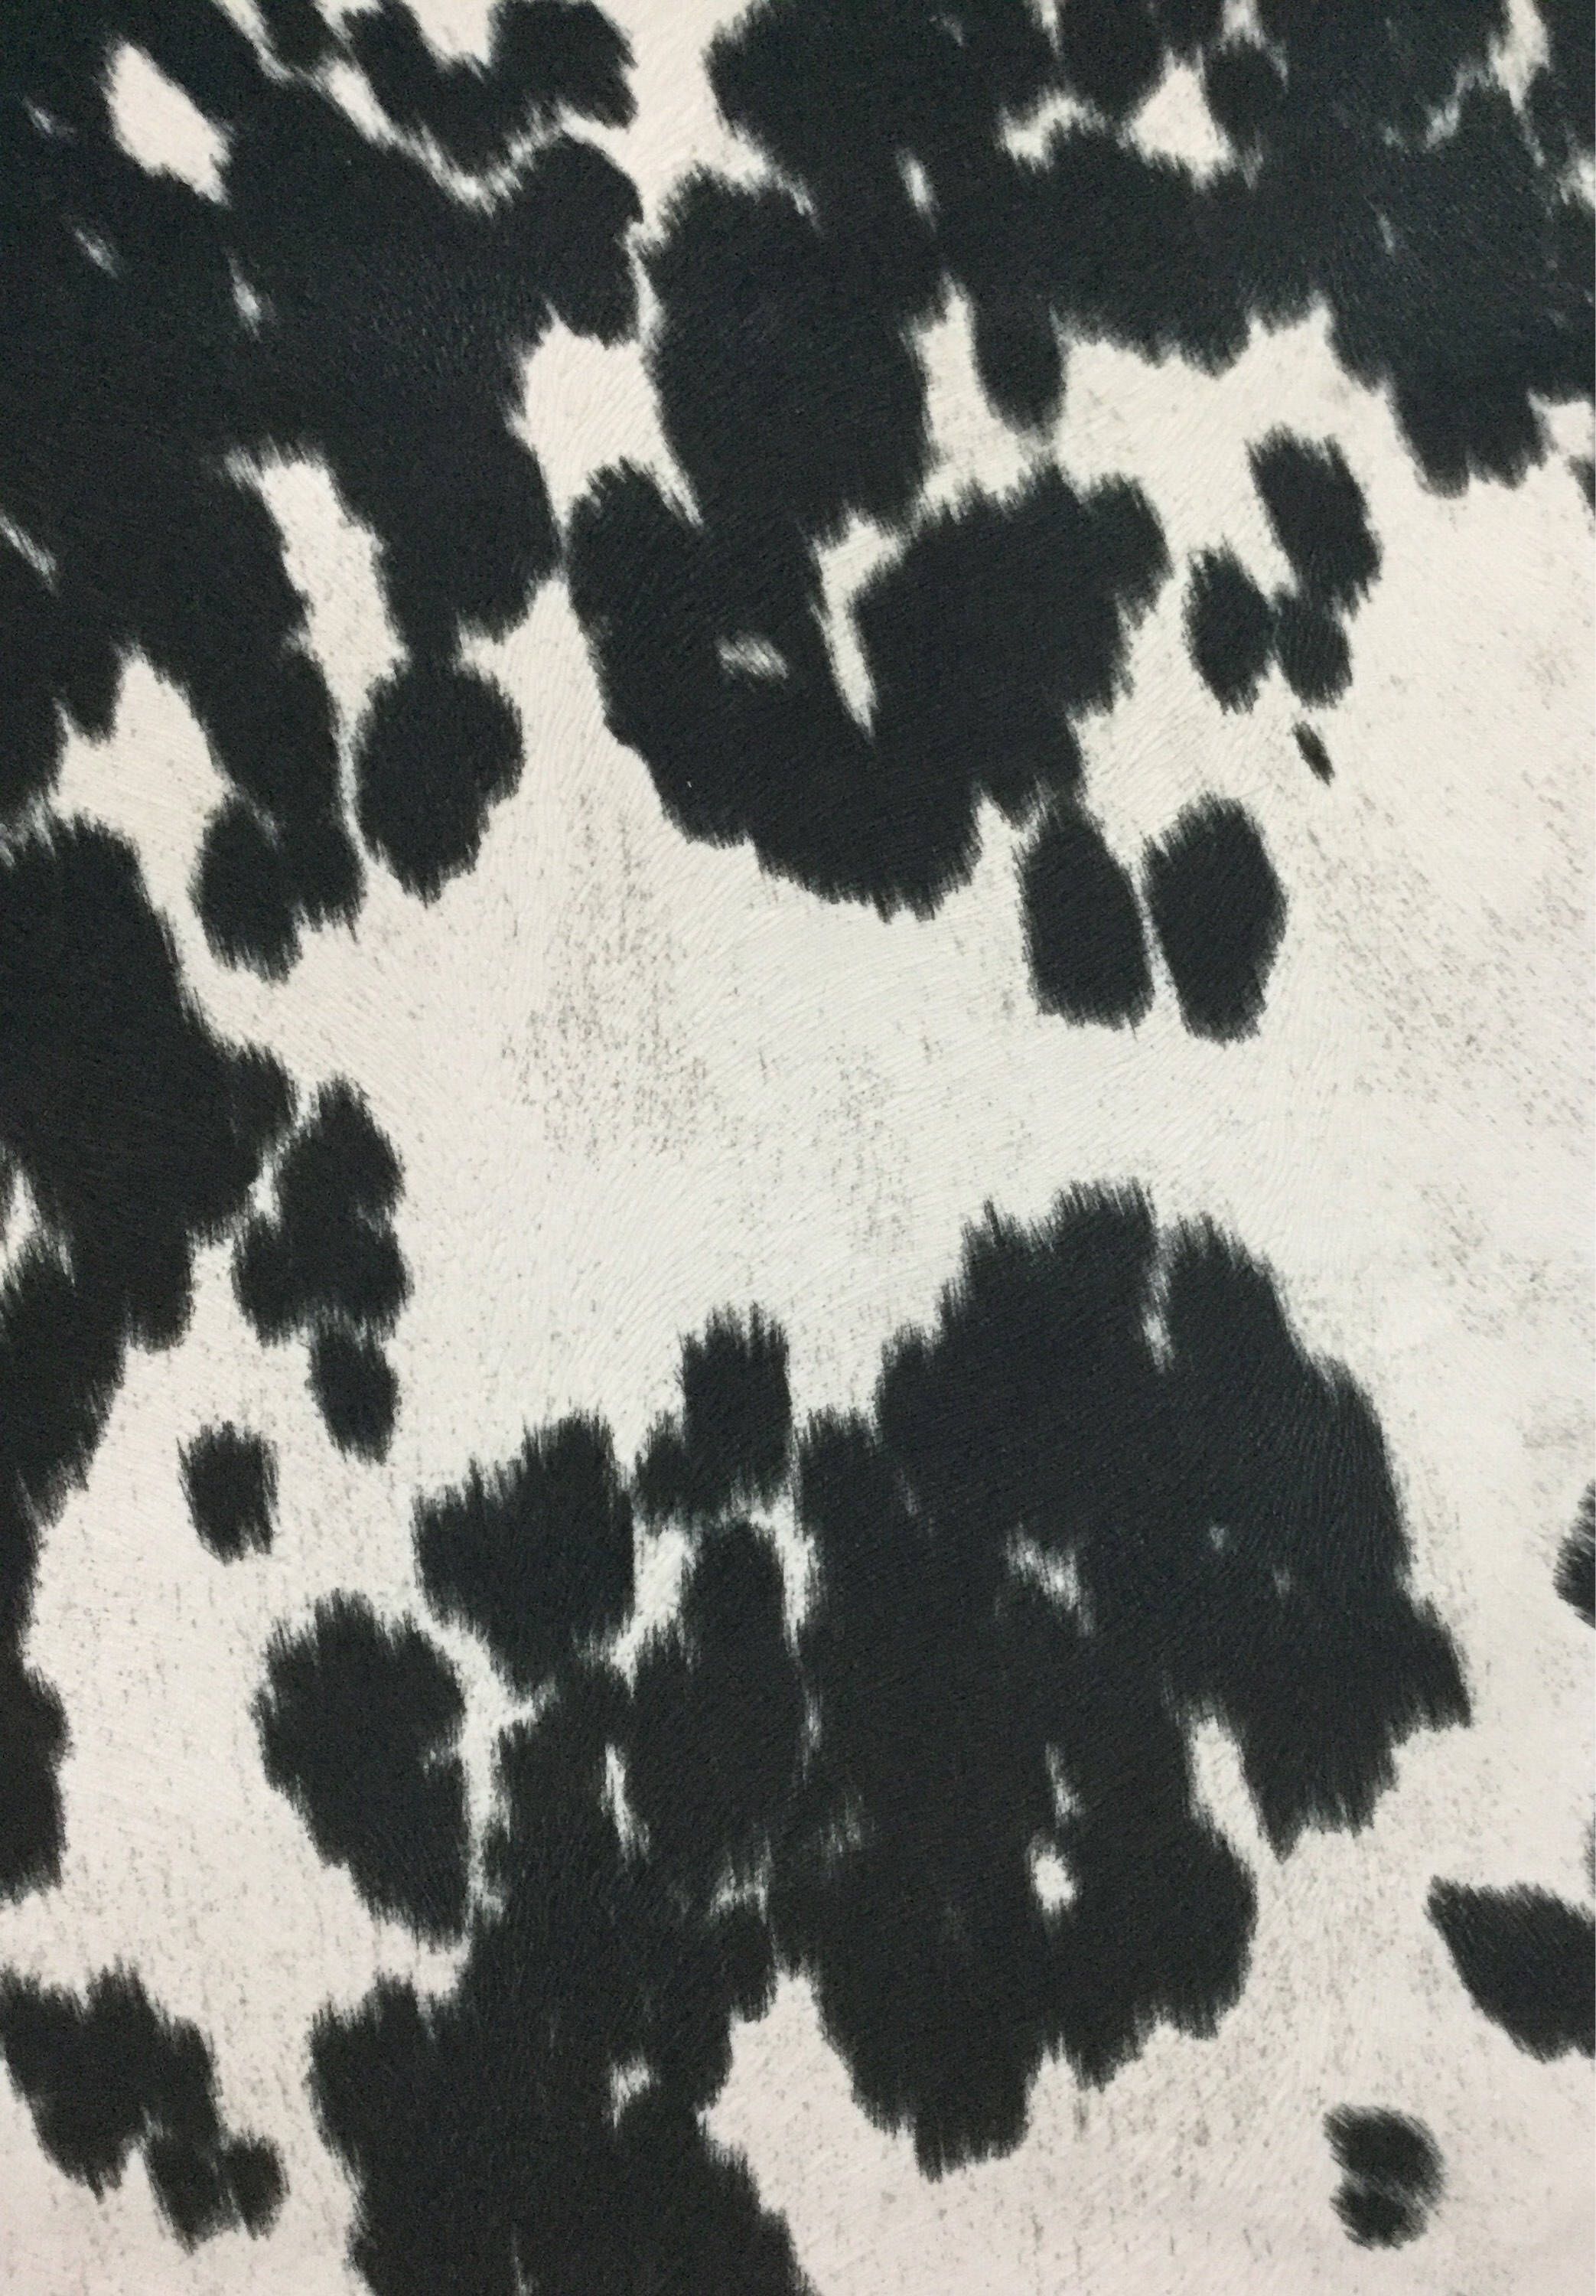 Black and White Cow Hide Fabric Upholstery Fabric by the. Etsy. Cow print wallpaper, Cowhide fabric, Western aesthetic wallpaper